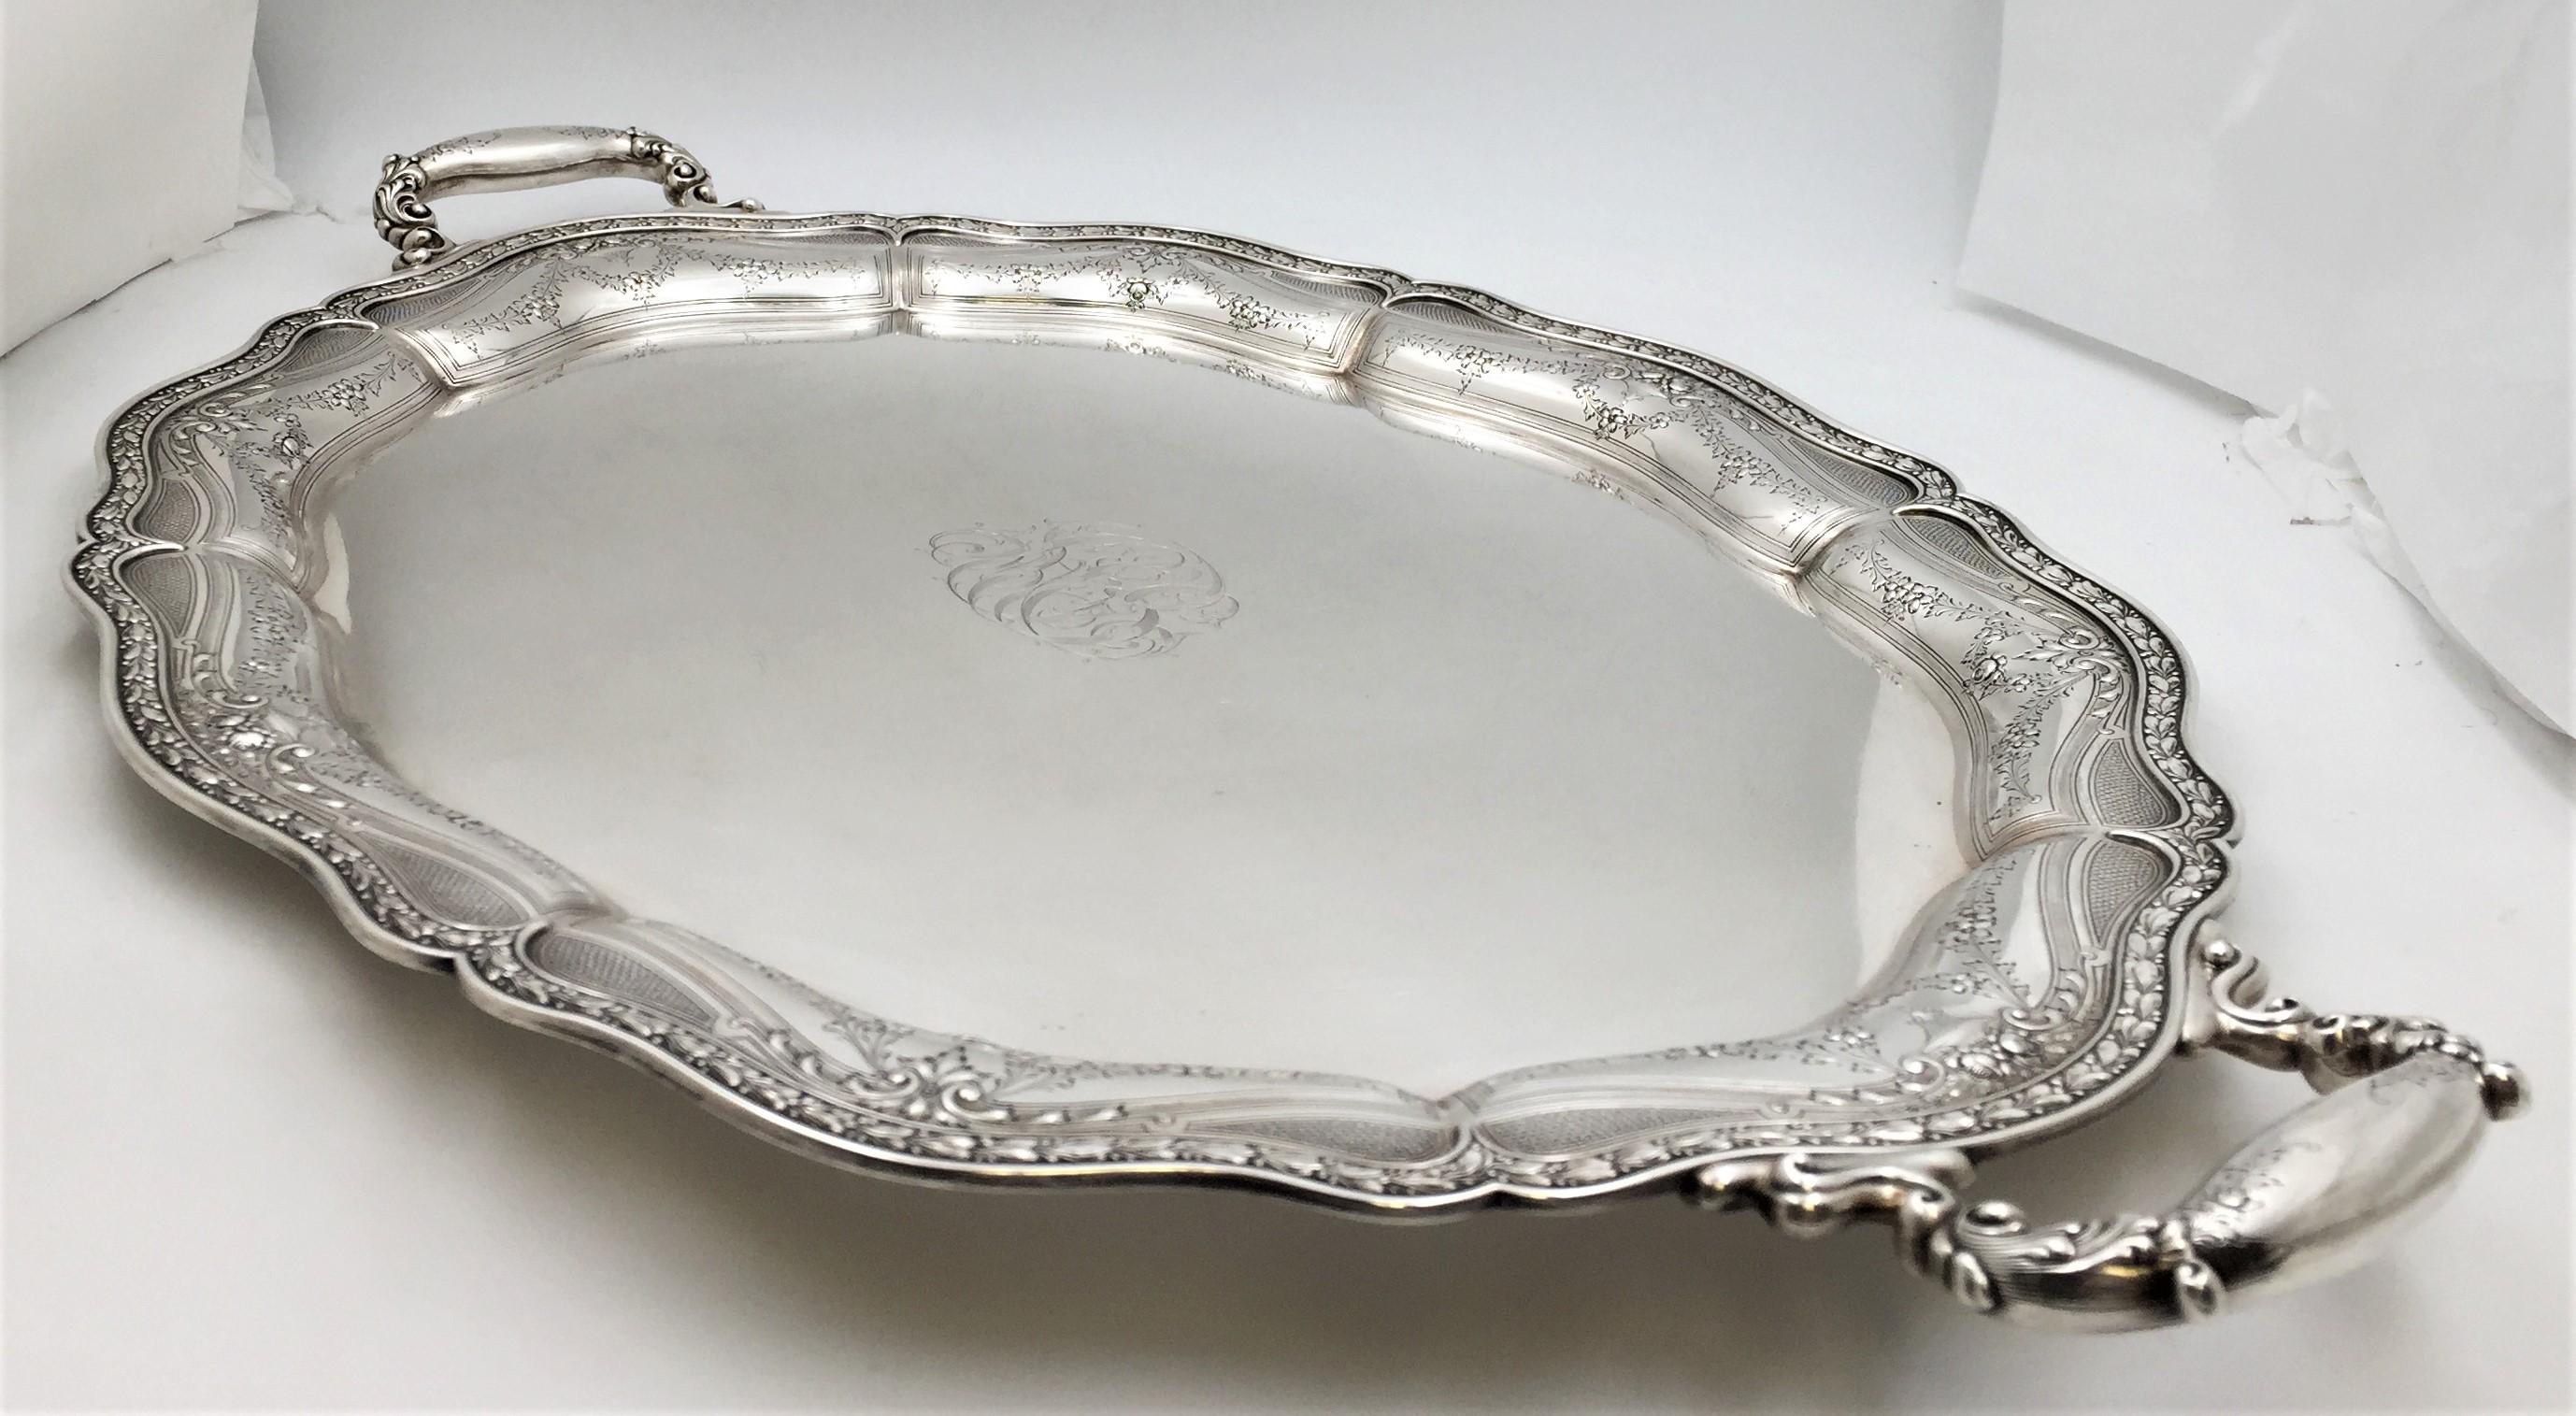 Black, Starr & Frost, 2-handled, sterling silver bar tray (with heavy gauge) in Art Nouveau style with the border chased with foliate swags, flowers, and other beautiful motifs. It measures 30 1/4'' in length from handle to handle (26'' within) by